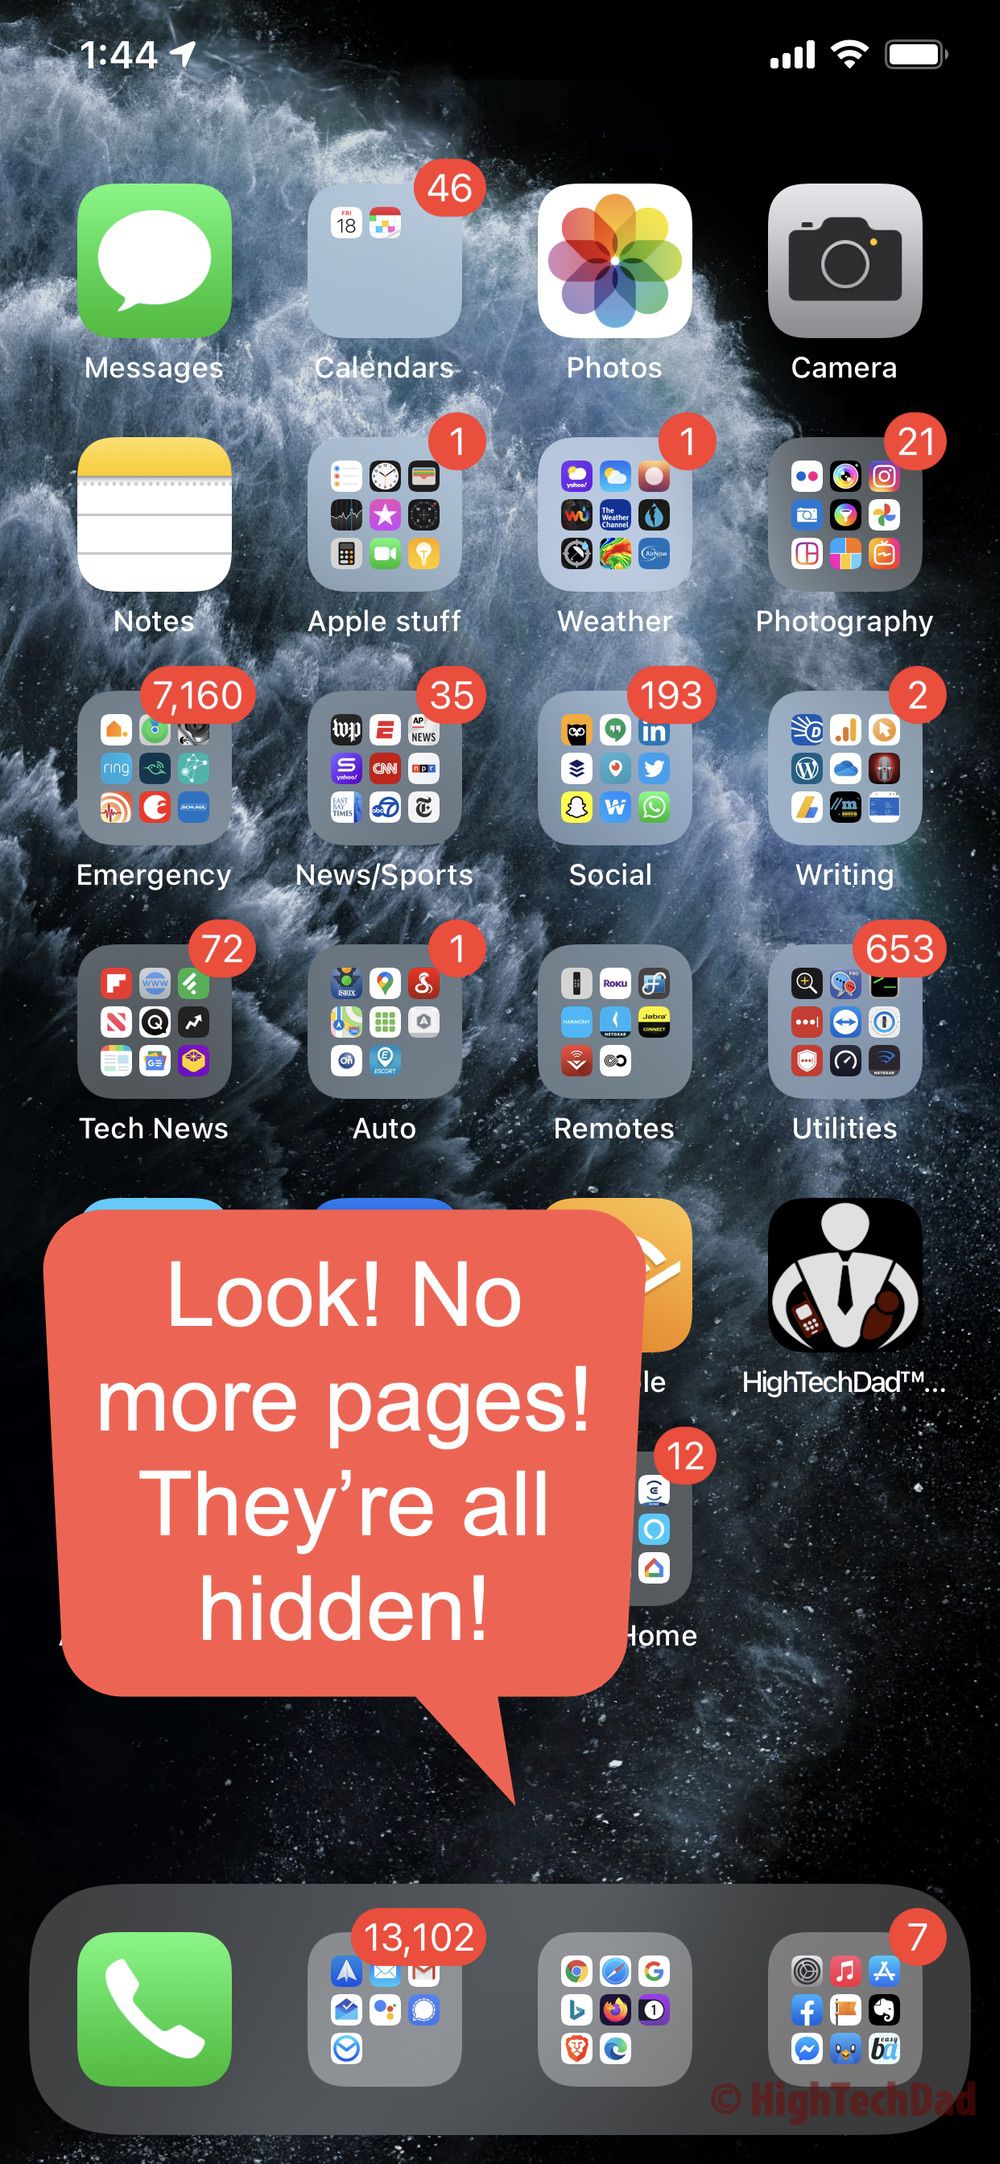 All pages but one are hidden - HighTechDad iOS 14 quick tip